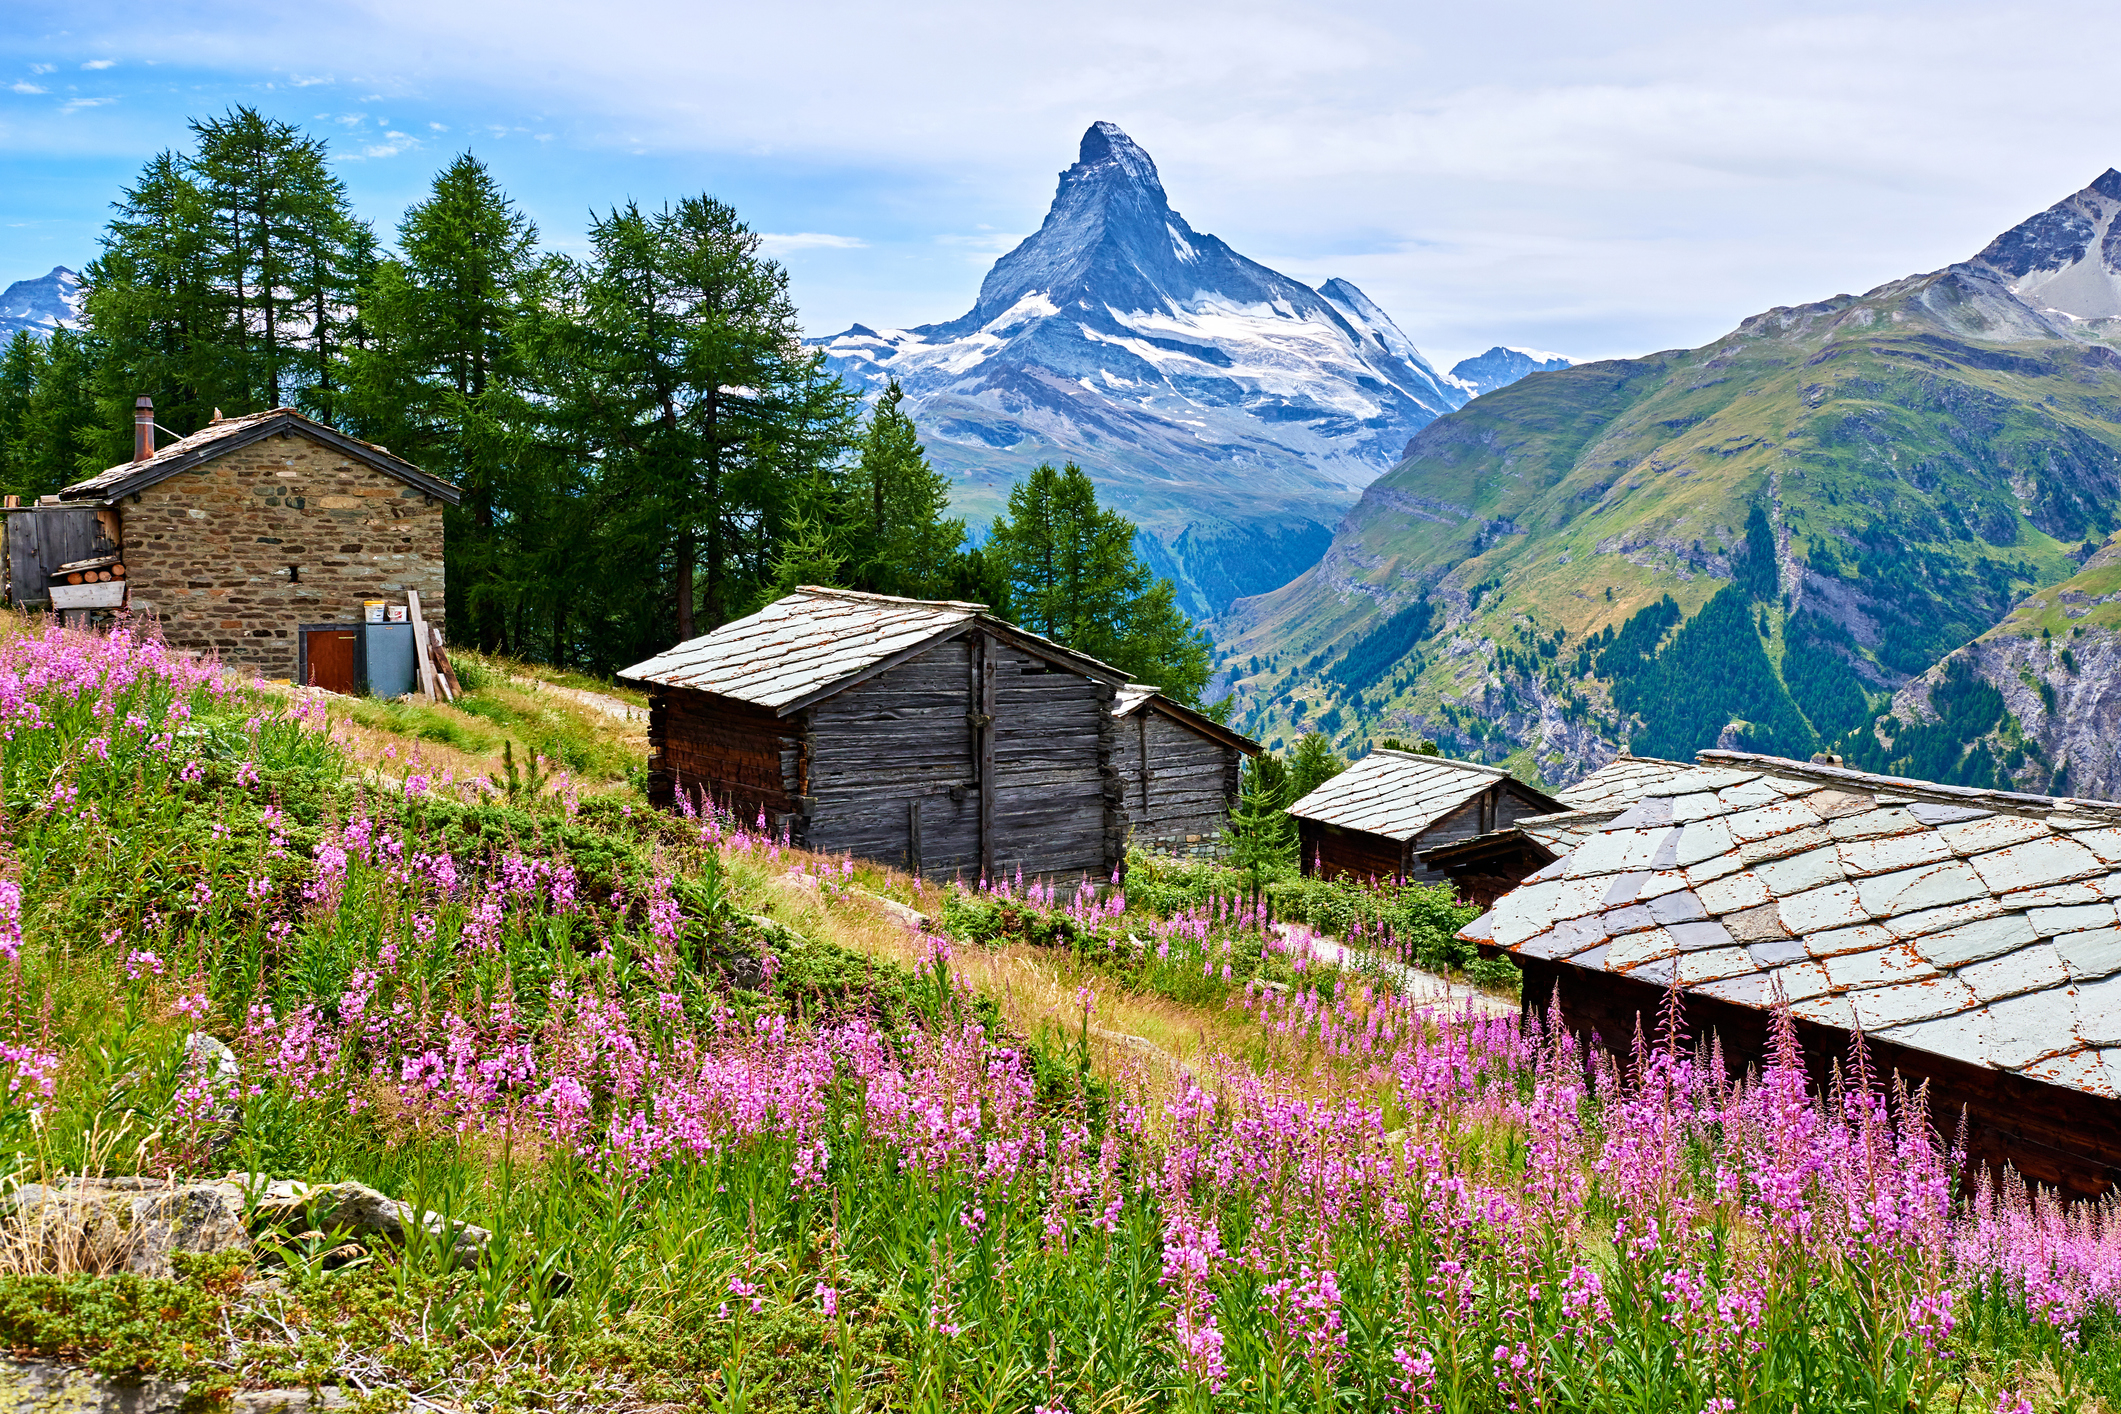 Alpine scenery with Matterhorn peak in the background and traditional wooden chalets surrounded by wildflowers